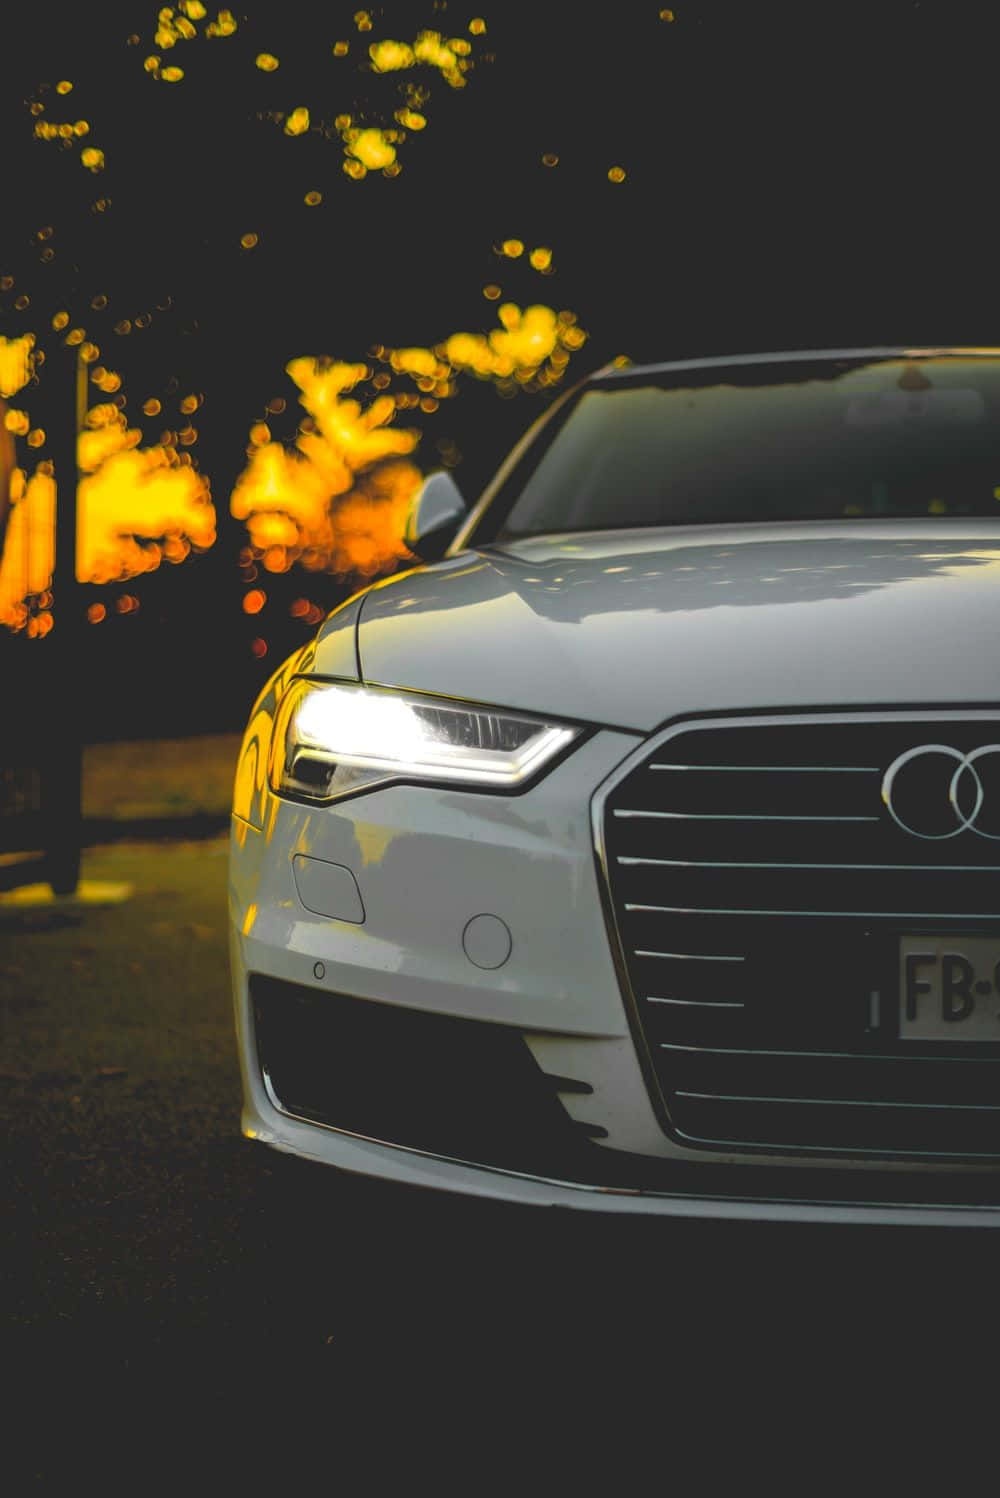 Sleek and modern Audi A4 parked by the lake Wallpaper